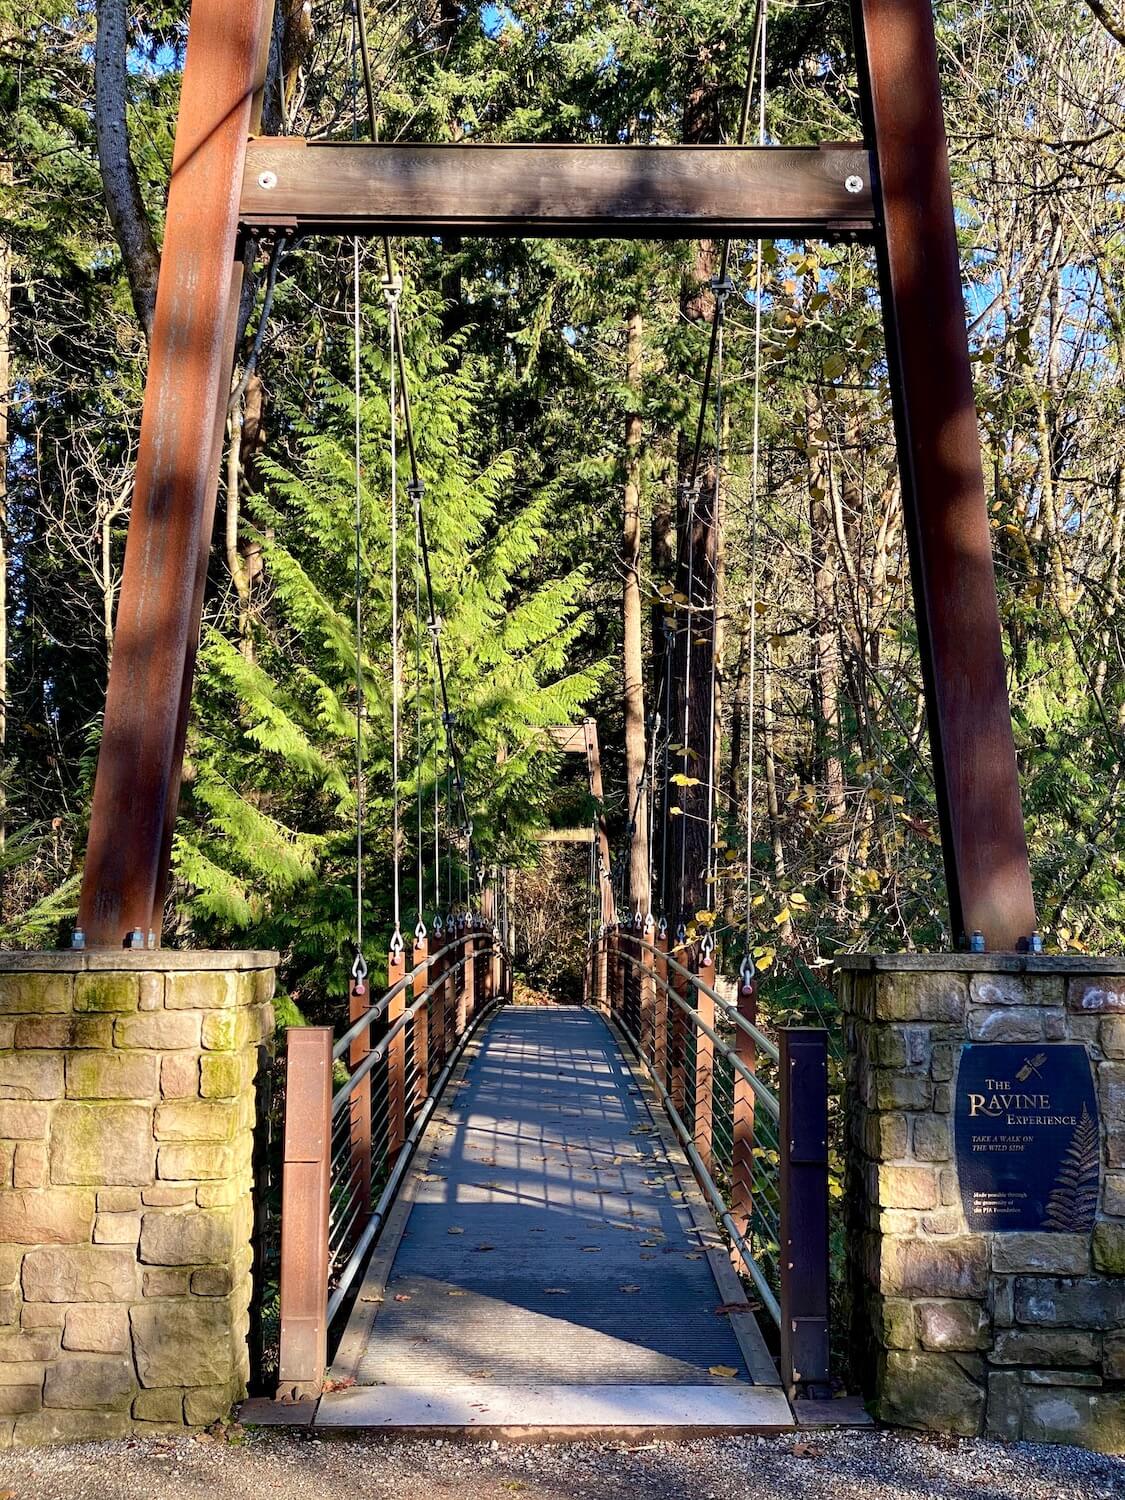 The suspension bridge at Bellevue Botanical Garden is a great outdoor thing to do in Winter in Seattle. The thick cables are connected to railings that hold the engineering contraption up under green leafy cedar and fir trees.